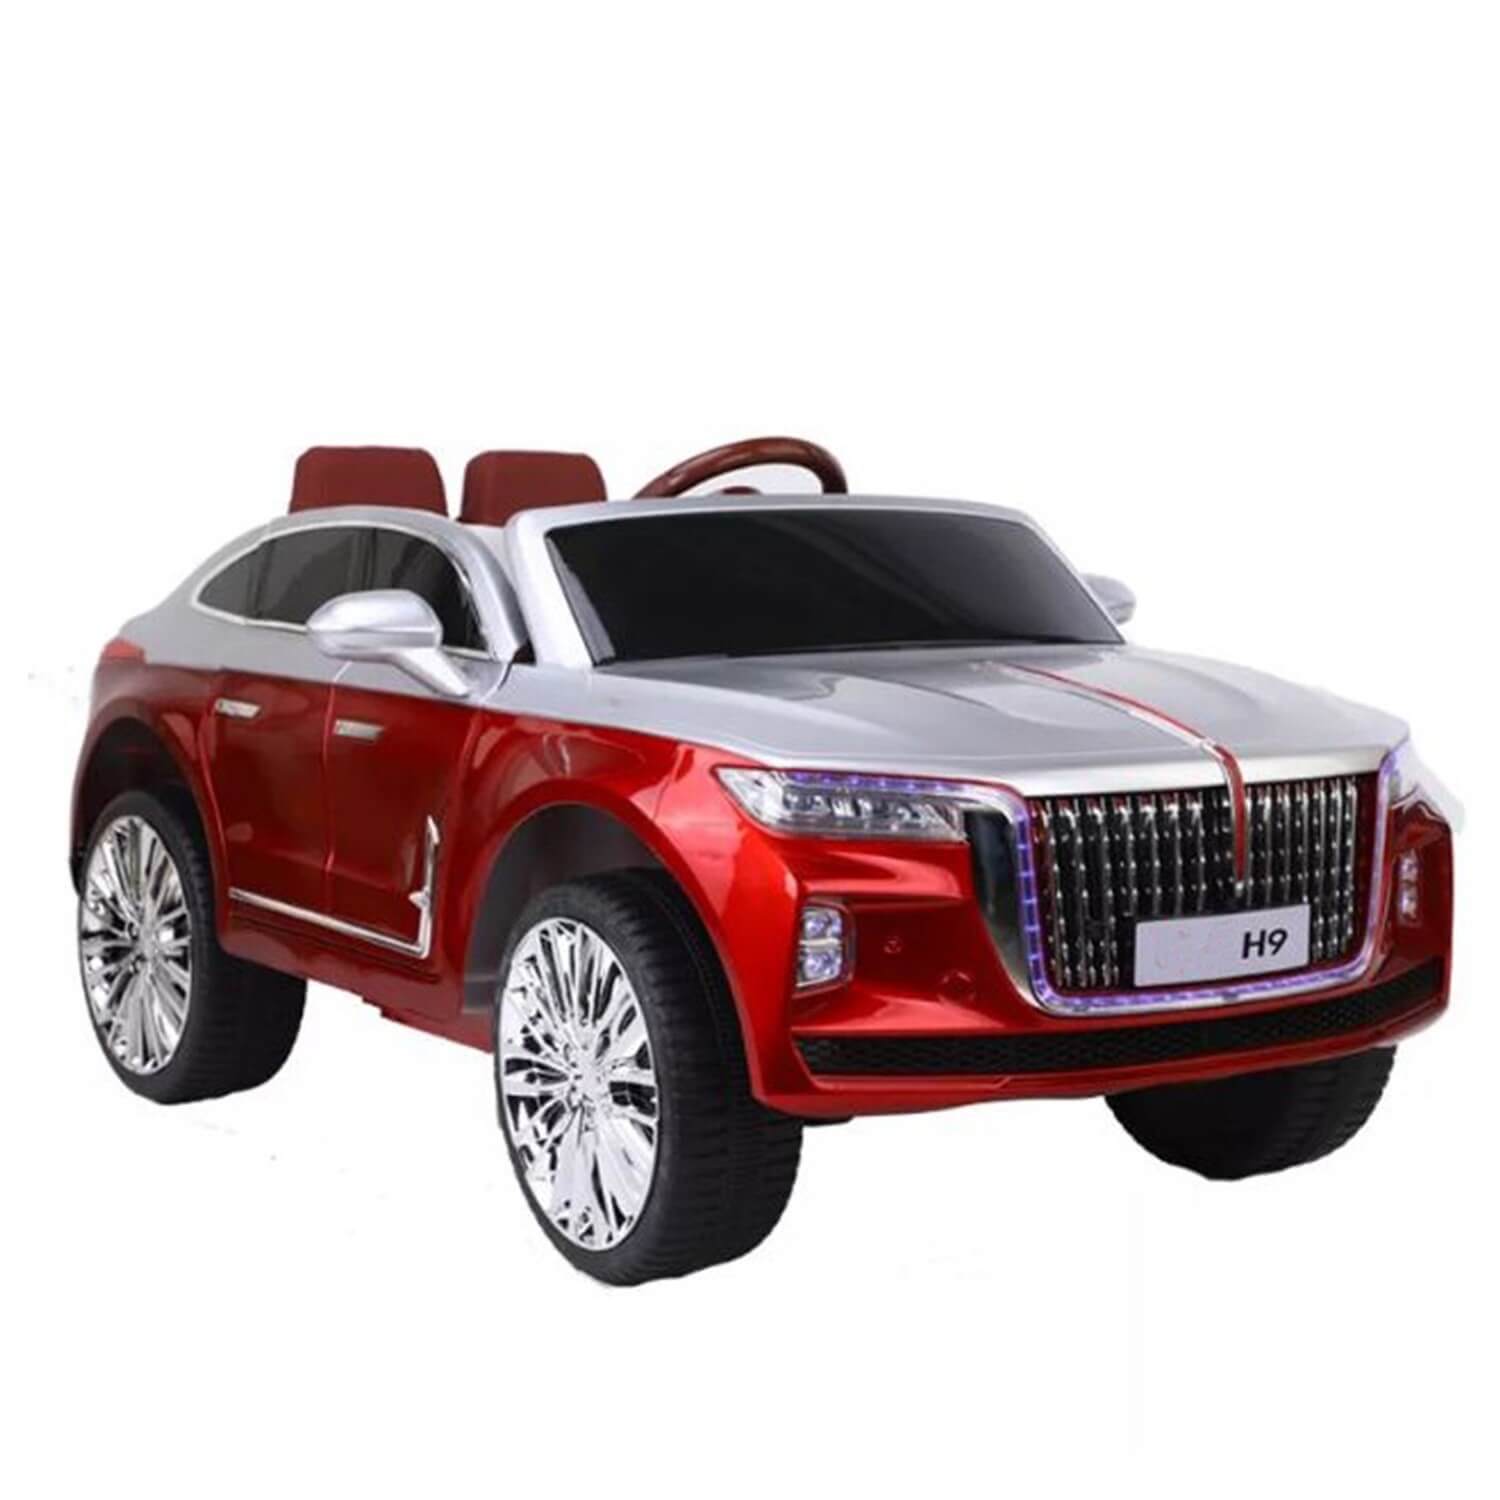 Iconic Hybrid Electric 4wd car for kids